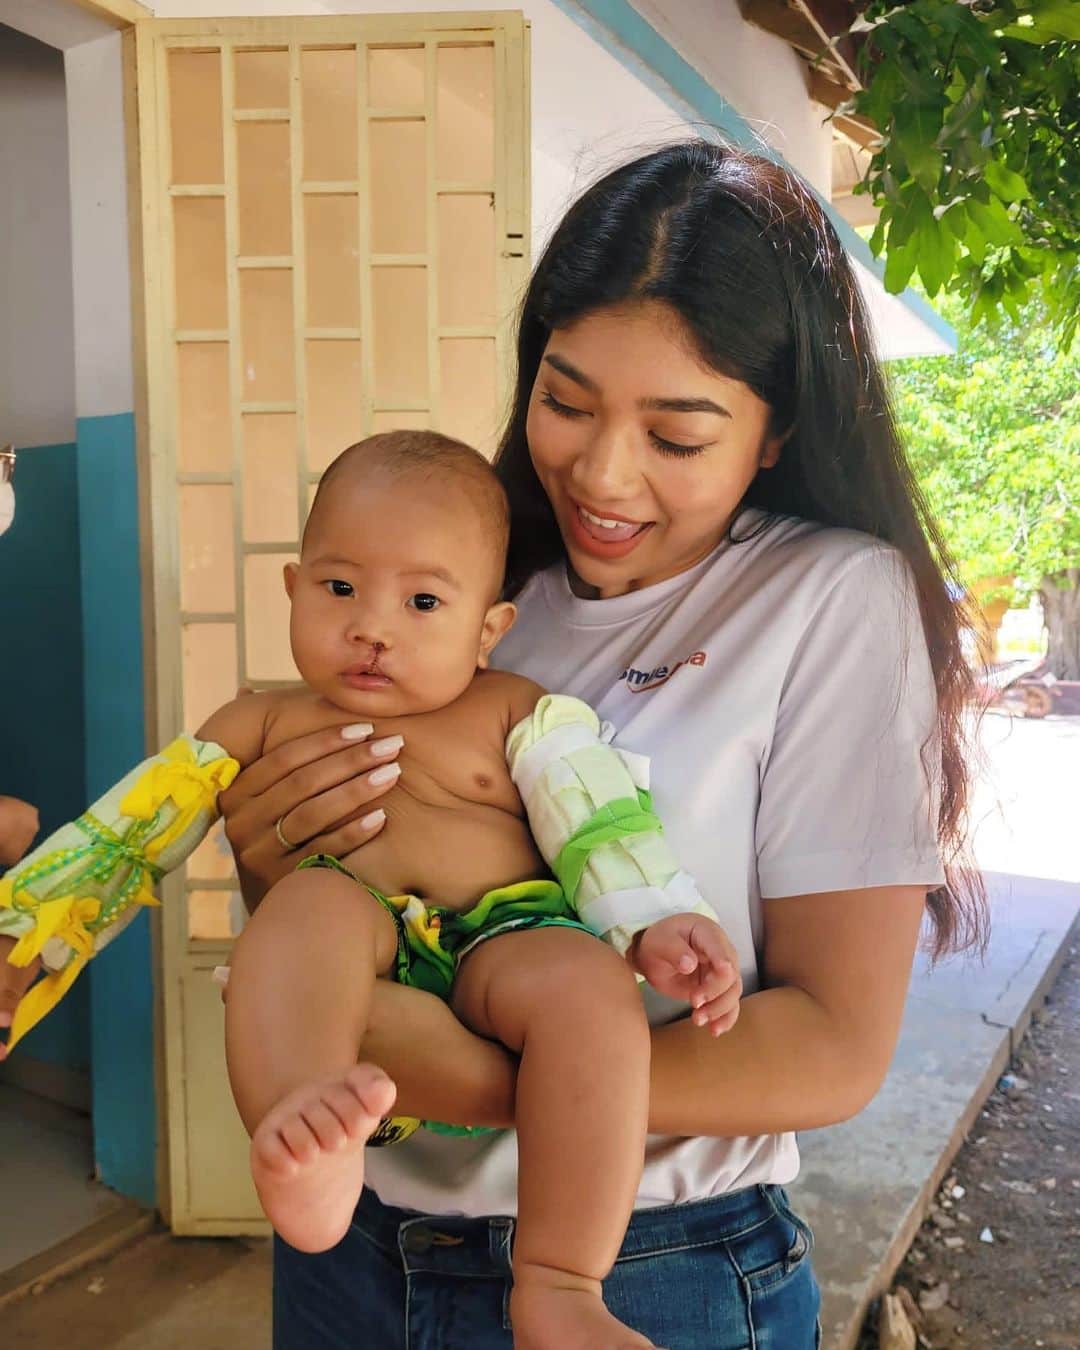 吉川プリアンカさんのインスタグラム写真 - (吉川プリアンカInstagram)「Spreading Smiles in Siem Reap: Highlights from my recent medical mission with @smileasiaorg and @smilecambodiaorg !  As an International brand ambassador for Smile Asia since 2017, attending medical missions holds a special place in my heart. Witnessing the joy on the faces of patients is truly priceless.  Here are some incredible moments from our mission  A diverse team of 40 volunteers from 9 countries came together, including Cambodia, China, Hong Kong, India, Japan, Malaysia, Myanmar, Singapore, and the United States. We were able to cover 23 successful surgeries, 26 health evaluations. We participated in the 7th Edition of 'Walk for a Smile' on 17th June, covering 15km to raise awareness for Smile Cambodia/Asia and children with facial deformities.  I'm thrilled to welcome Saria Oikawa @sariaoikawa Miss Universe Japan 2022 (1st Runner-Up), as Smile Asia's new brand ambassador.  We were honored to have special guests, including Davin Prasat, Miss Universal Woman International 2023 (4th Runner-Up), and Khemma Metayer, Miss Supernational Cambodia 2023.  Join us in spreading more smiles and making a difference!  https://www.smileasia.org/get-involved/medical-volunteer/ (also link in bio) to find out more about our medical volunteering opportunities.  コロナ後はじめて参加したメディカルミッション。今回のミッションでは、23名の患者様の手術を行い、26名の患者様の診察をいたしました。  スクリーニング日に今手術ができる状態でないと診断した患者様へは、手術ができるお身体になるまでサポートを行っています。  また、本ミッションでは、計9カ国より40名のボランティアの方々が参加してくださいました。  スマイル・アジアでは、ドクター、ナース、現場に入っていただけるボランティアの方々を世界中より常に募集しております。ご興味のある方は、プロフィールのリンクよりご連絡ください。  最後に、私事ではありますが、これまではブランドアンバサダーとして活動してきましたが、本年度よりスマイル・ジャパンの理事としても関わらせていただくことになりました。  今後ともスマイル・アジアをはじめジャパン、そして各国の支部をご支援いただけますと幸いです。  世界中に笑顔が増えることを心より願って。  #smileasia #smilecambodia #facialdeformaties #cleflipandpalate #medicalmission #cambodia #smile #internationalbrandambassador #helpusspreadsmiles #スマイルアジア #スマイルカンボジア #医療 #口唇口蓋裂 #手術 #医療現場 #アンバサダー #笑顔」6月20日 21時00分 - priyankayoshikawa